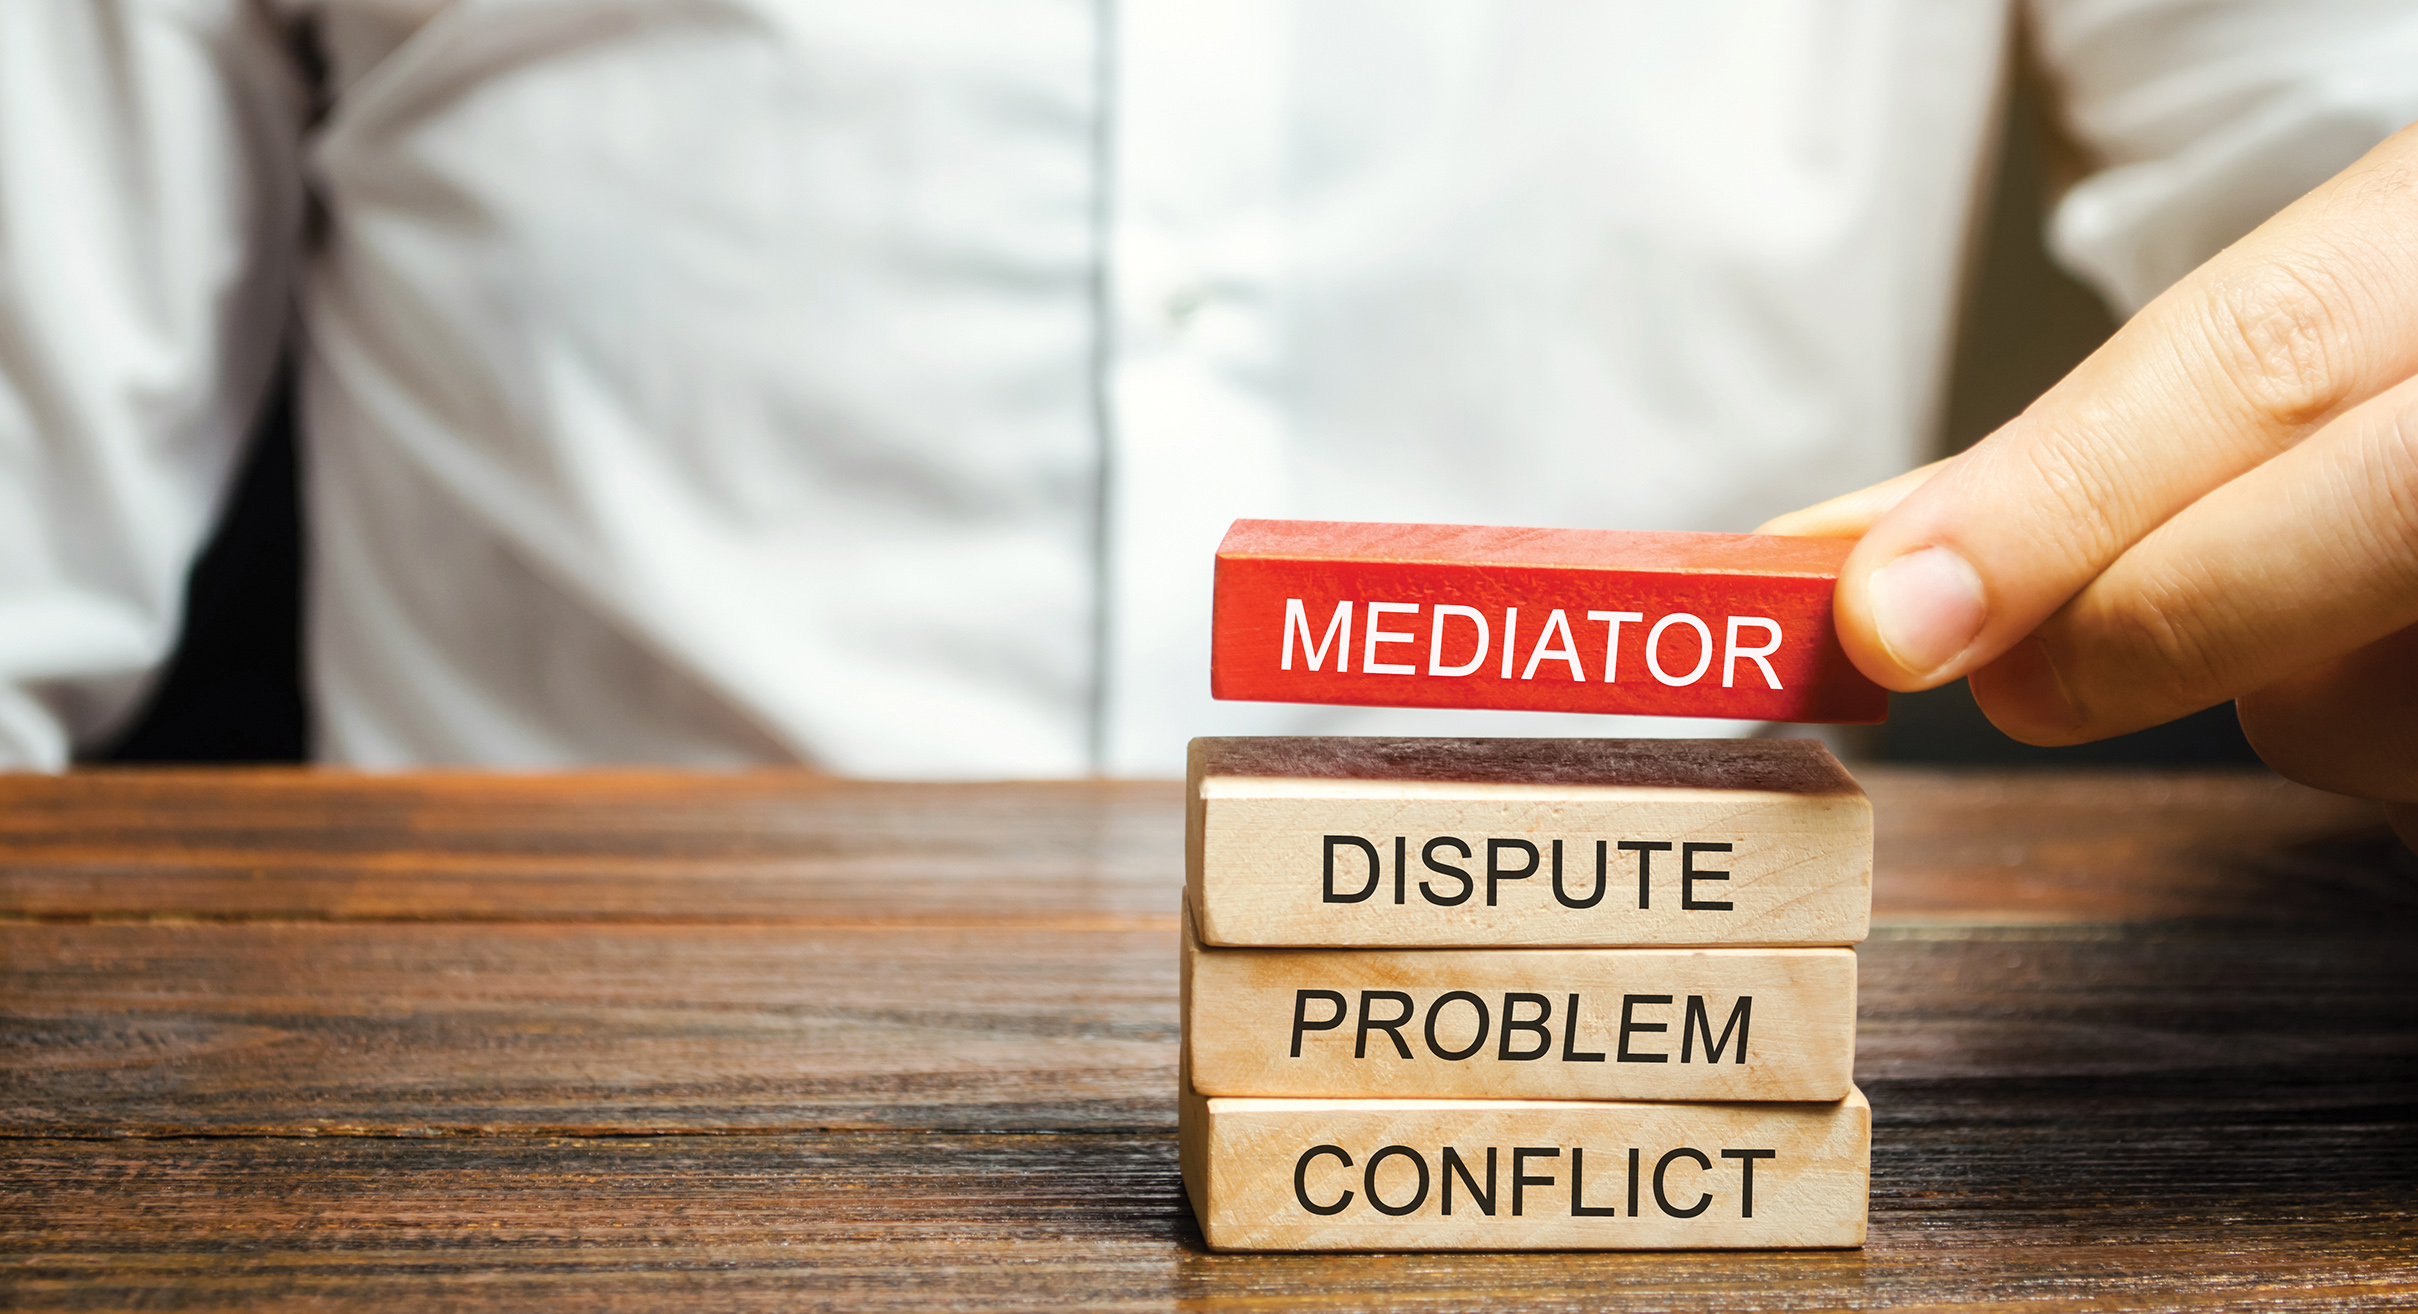 Mediation can save time and money to resolve workplace disputes